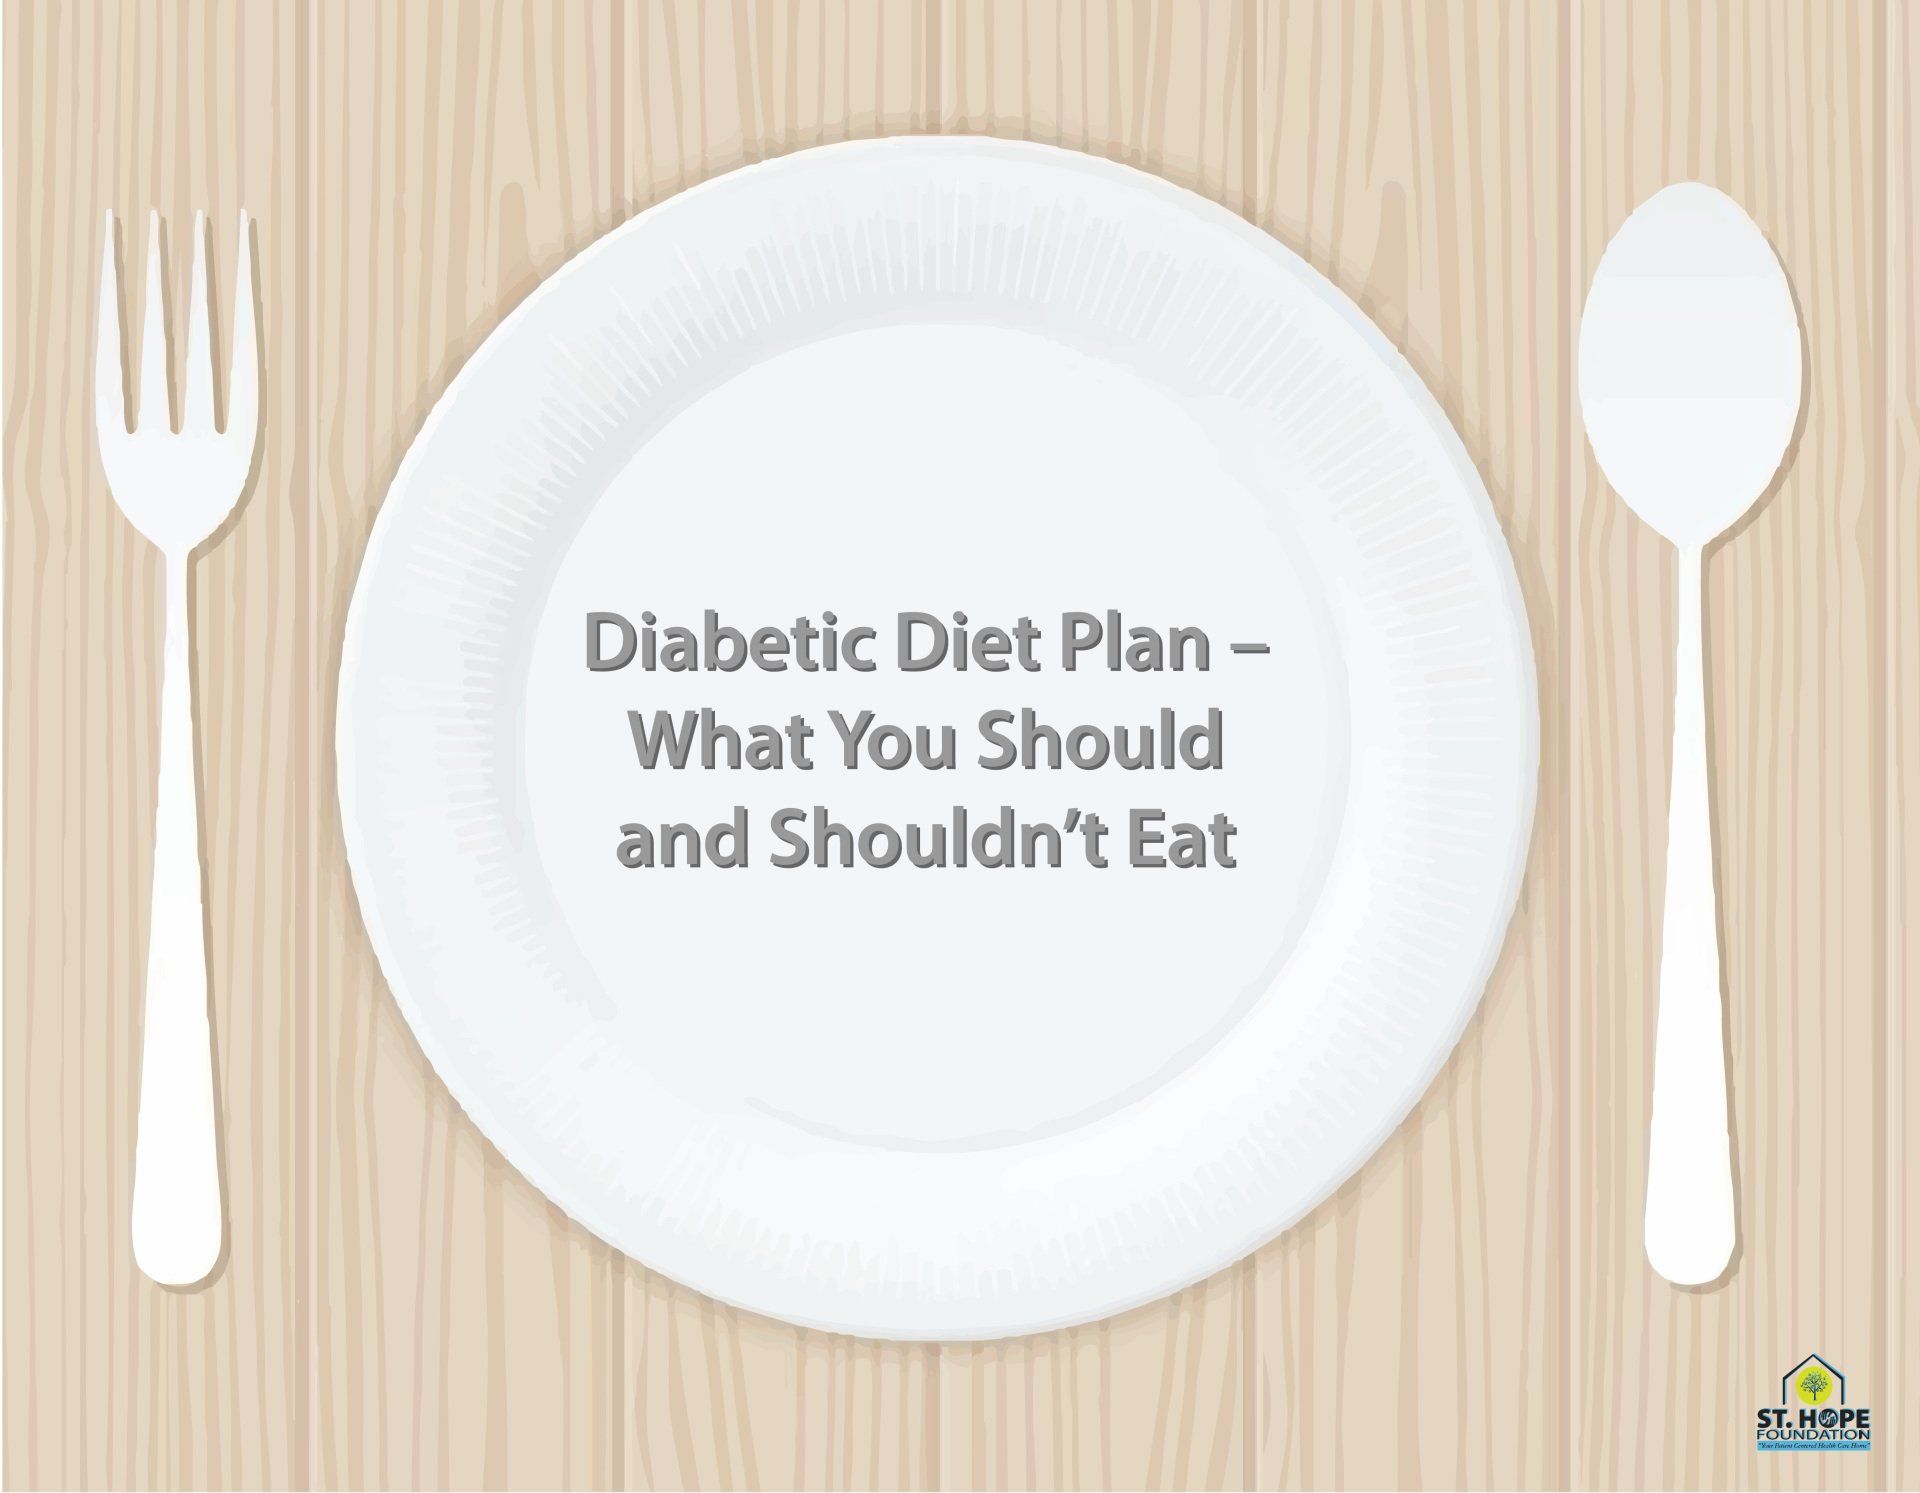 Diabetic diet plan- what you should and shouldn't eat